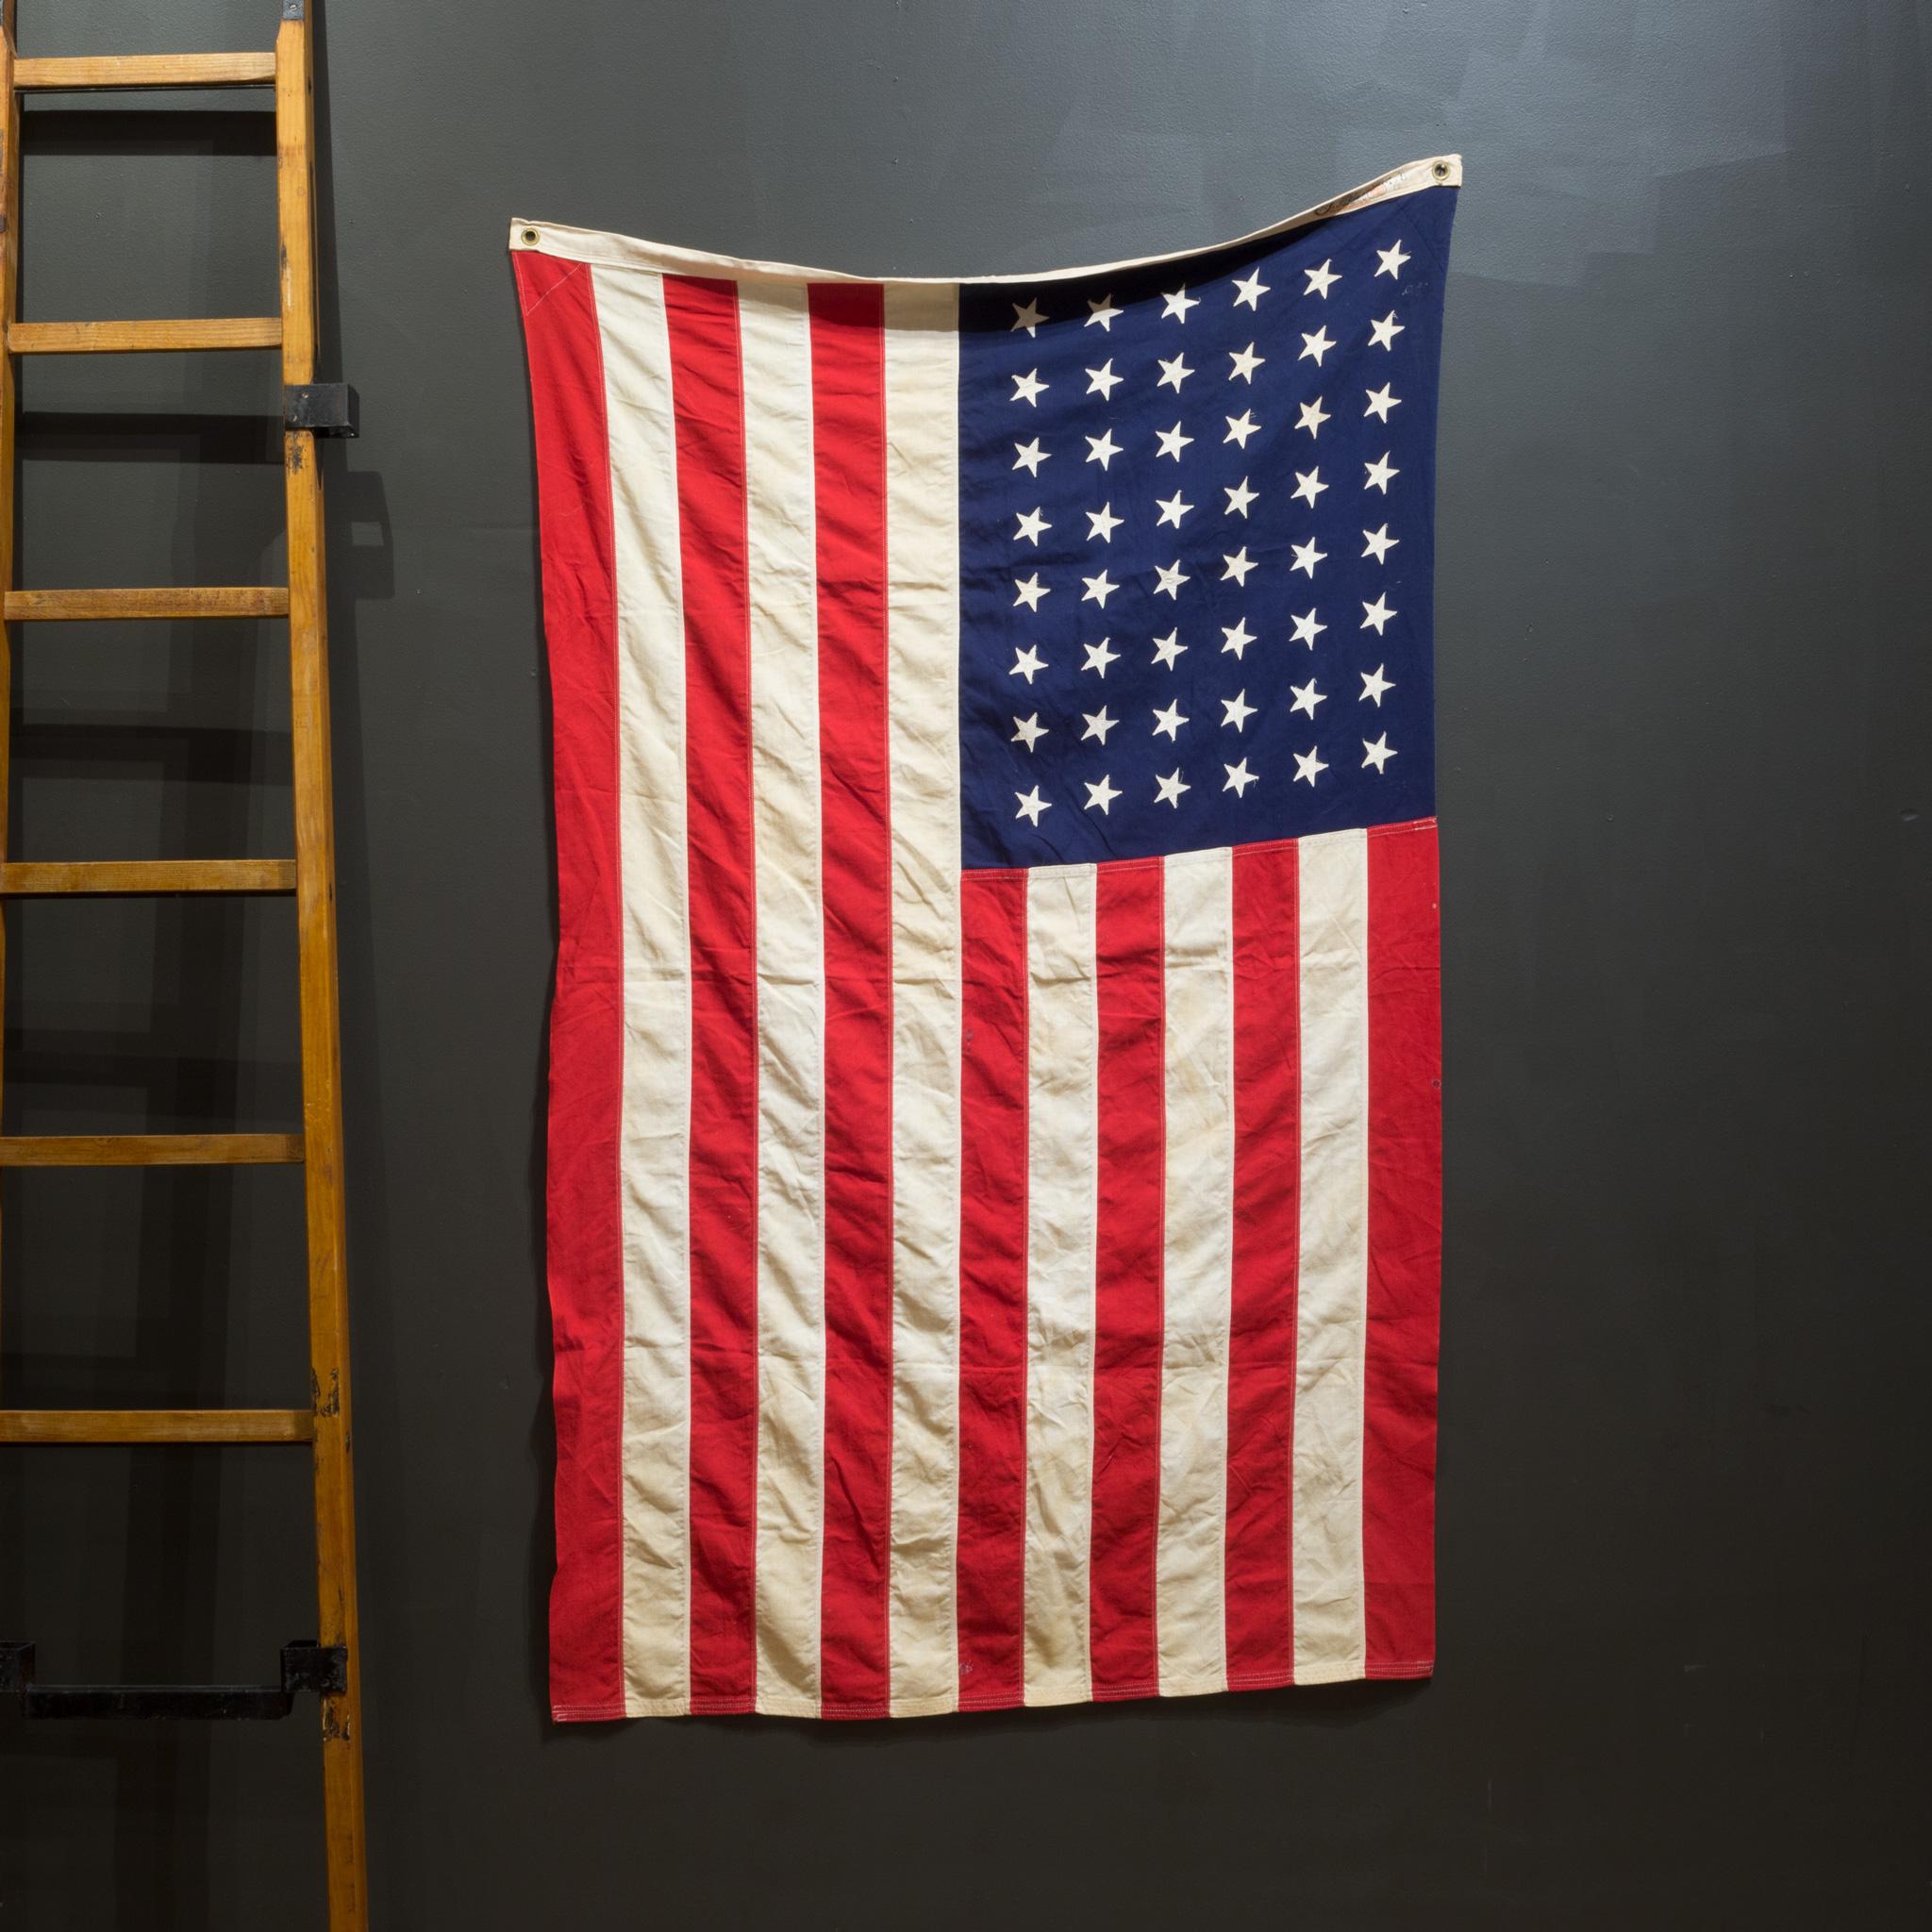 ABOUT

This is an original monumental American flag made by Bulldog Bunting Co. with 48 hand sewn stars and stripes. It is in good condition and has metal grommets to hang.

 CREATOR Bulldog Bunting Co.
 DATE OF MANUFACTURE c.1940-1950.
